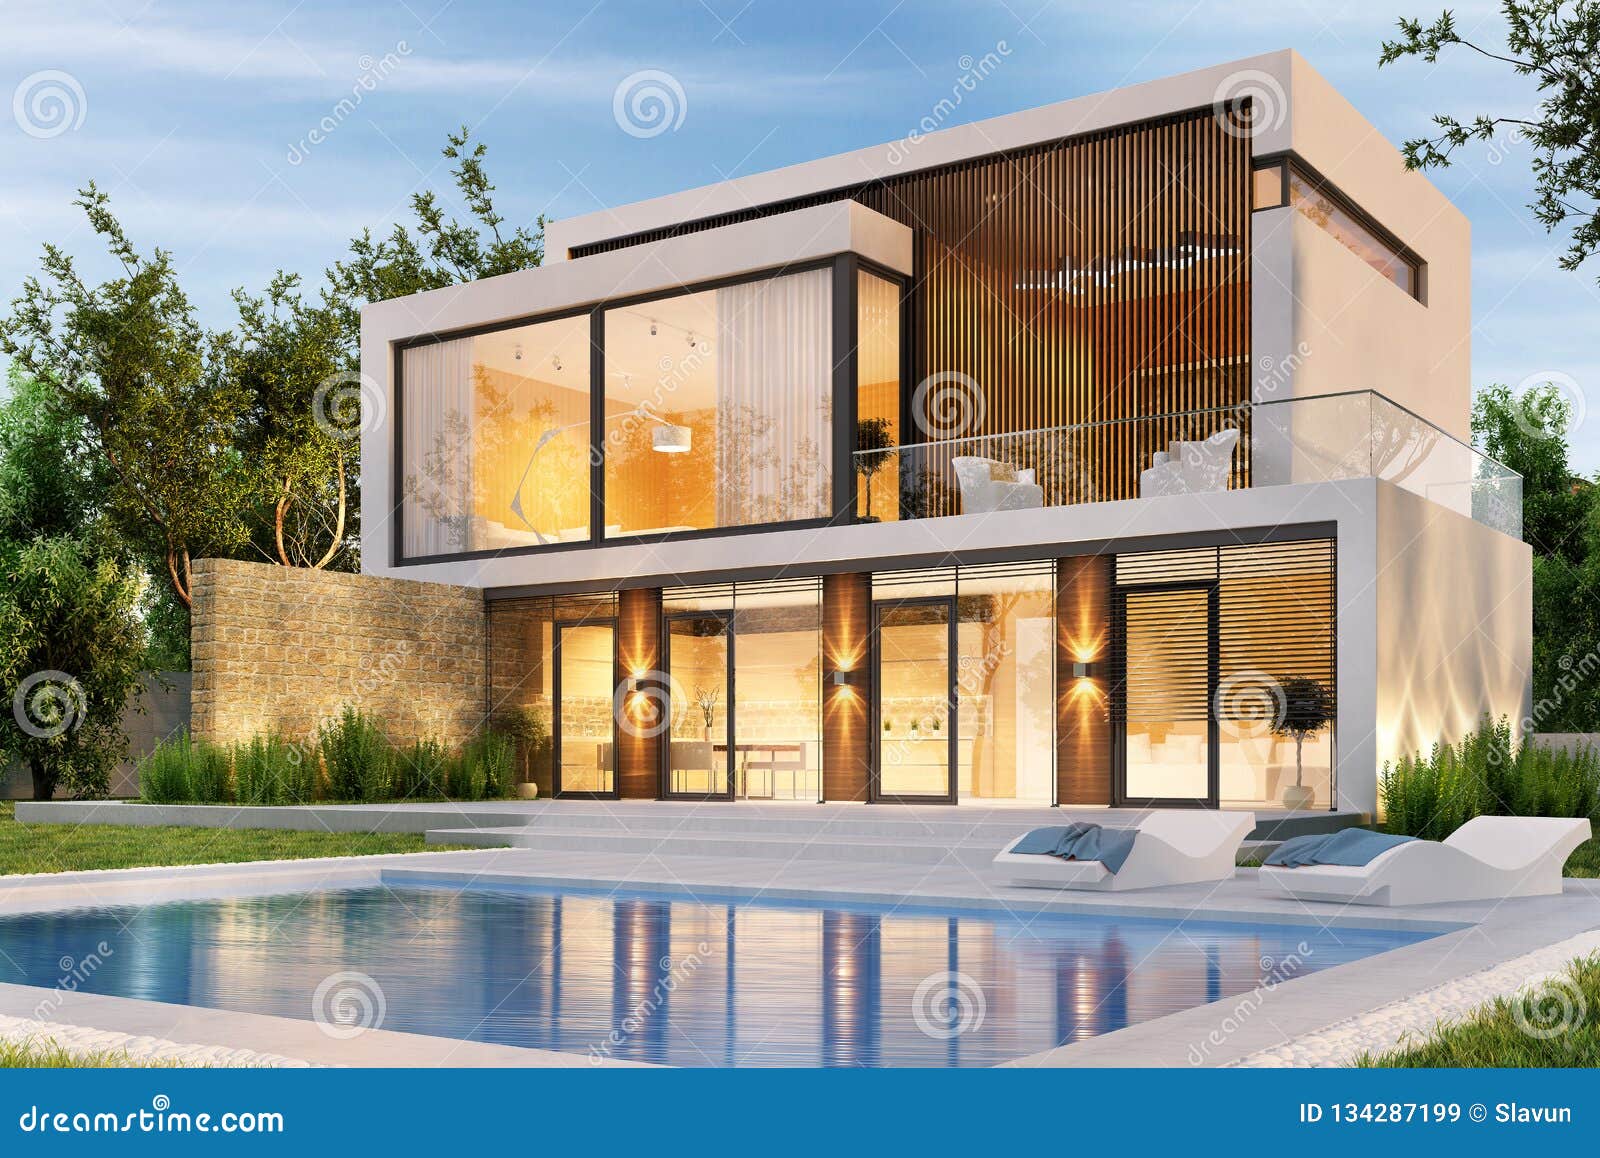 27 464 Swimming Pool House Photos Free Royalty Free Stock Photos From Dreamstime